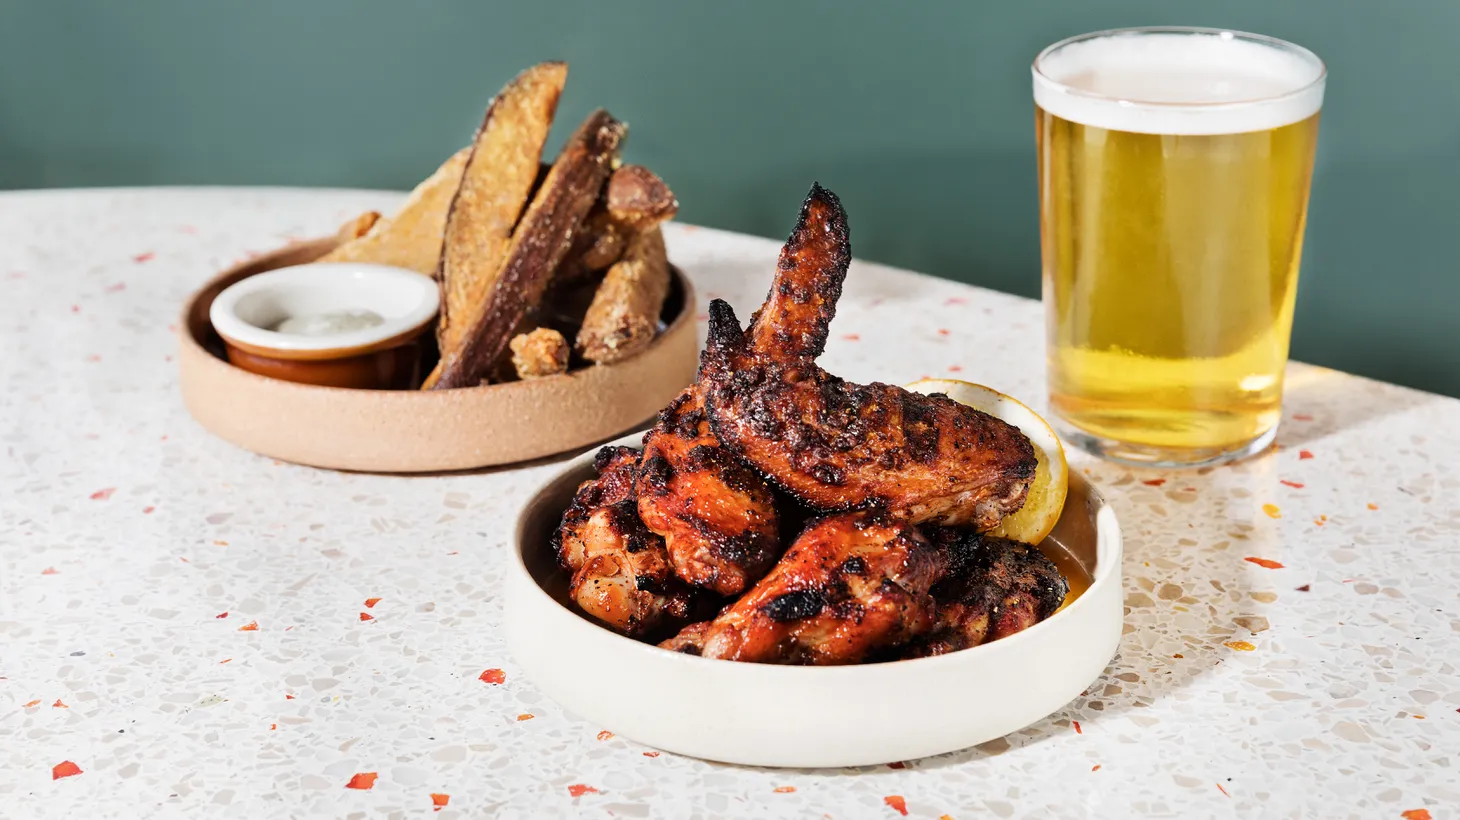 At Eszett, you can order their charcoal-grilled chicken wings with salsa macha, and big fries served with garlic mayo. Highland Park Brewery offers “Hello LA” IPA.